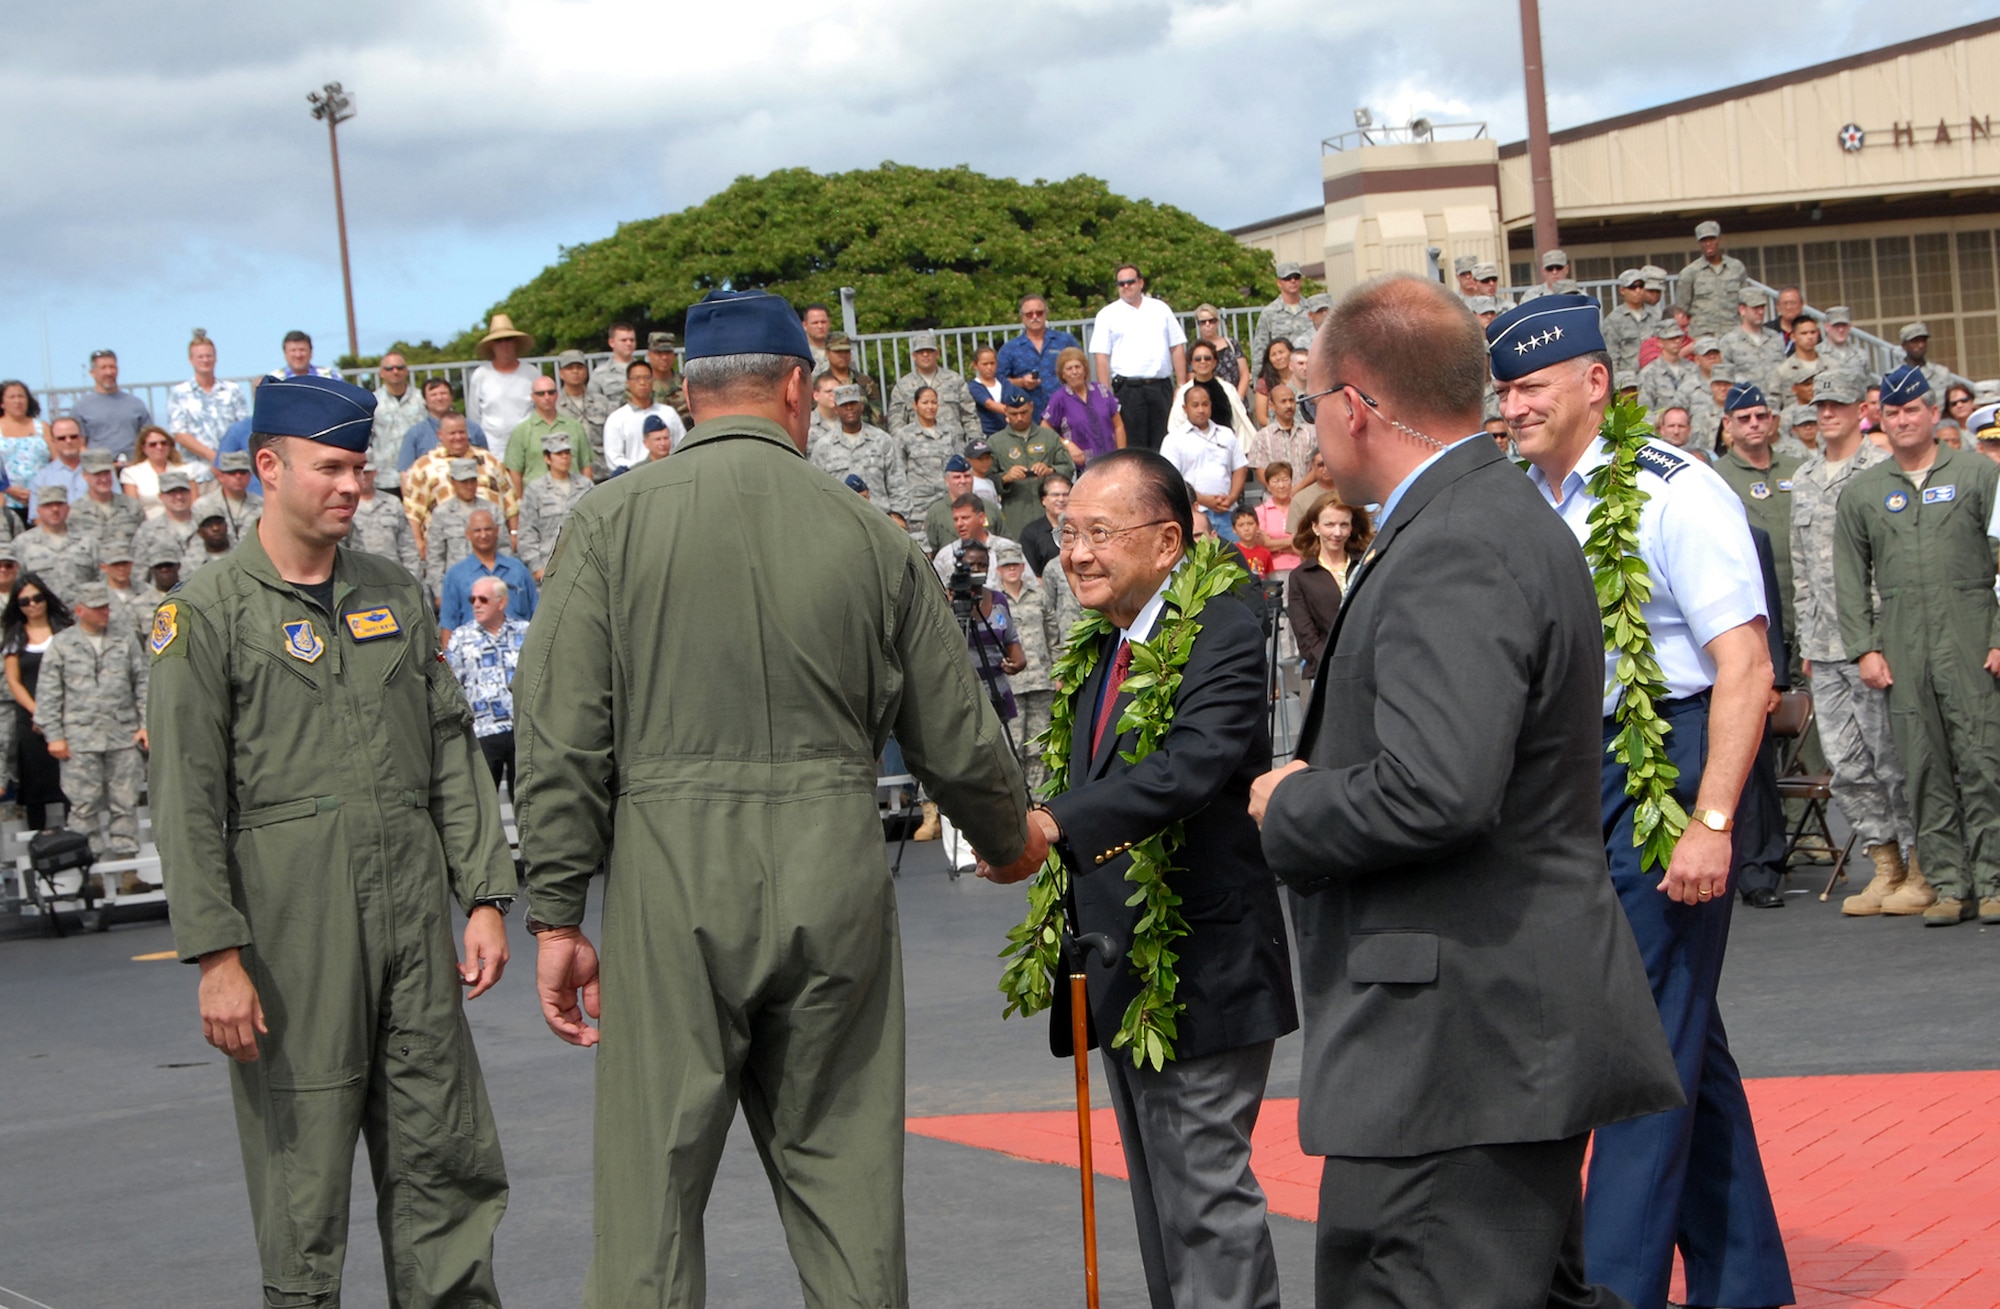 During F-22 Arrival Ceremony July 9, on Joint Base Pearl Harbor-Hickam, F-22 pilots, Lt. Col. Harvey "Banger" Newton, 19th Fighter Squadron and Lt. Col. Christopher "Frenchy" Faurot, 154th Wing, Hawaii National Guard, greet Senator Daniel K. Inouye as he arrives for the ceremony. Senator Inouye is followed by Gen. Gary L. North, commander, Pacific Air Forces. (U.S. Air Force photo/Tech. Sgt. Betty J. Squatrito-Martin)